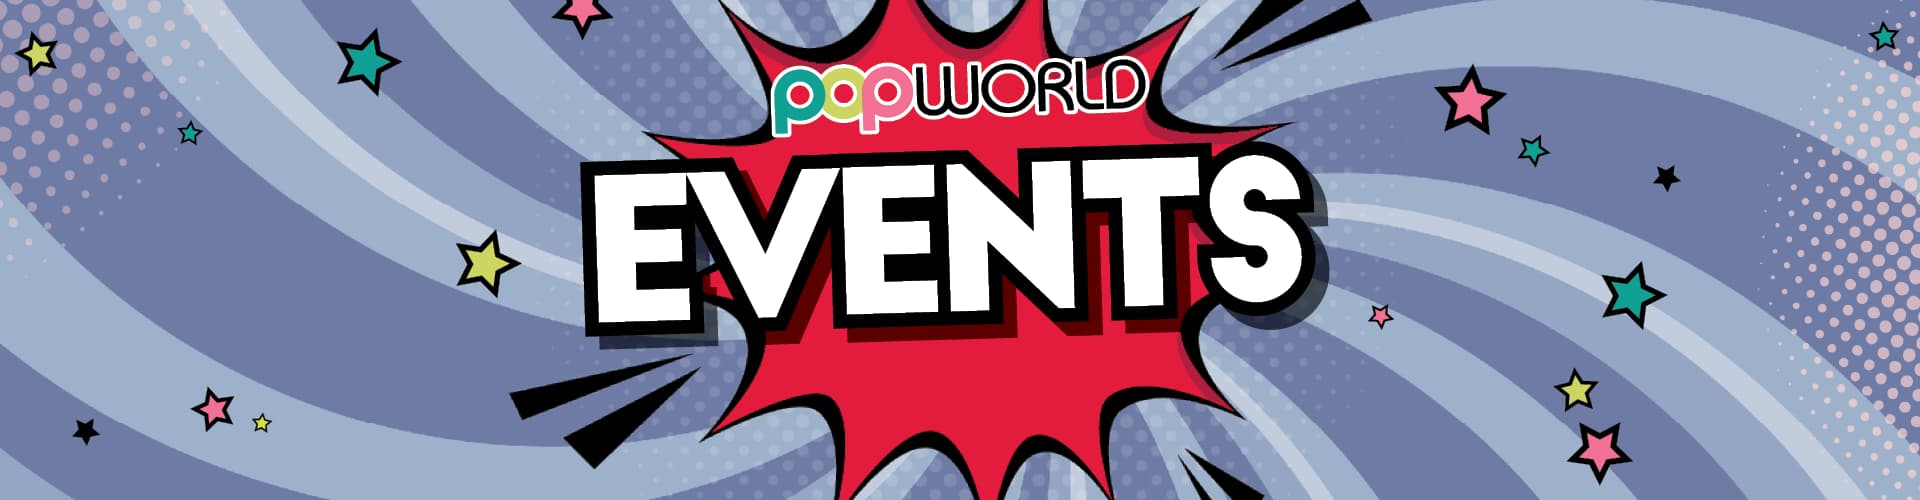 Events at Popworld Plymouth